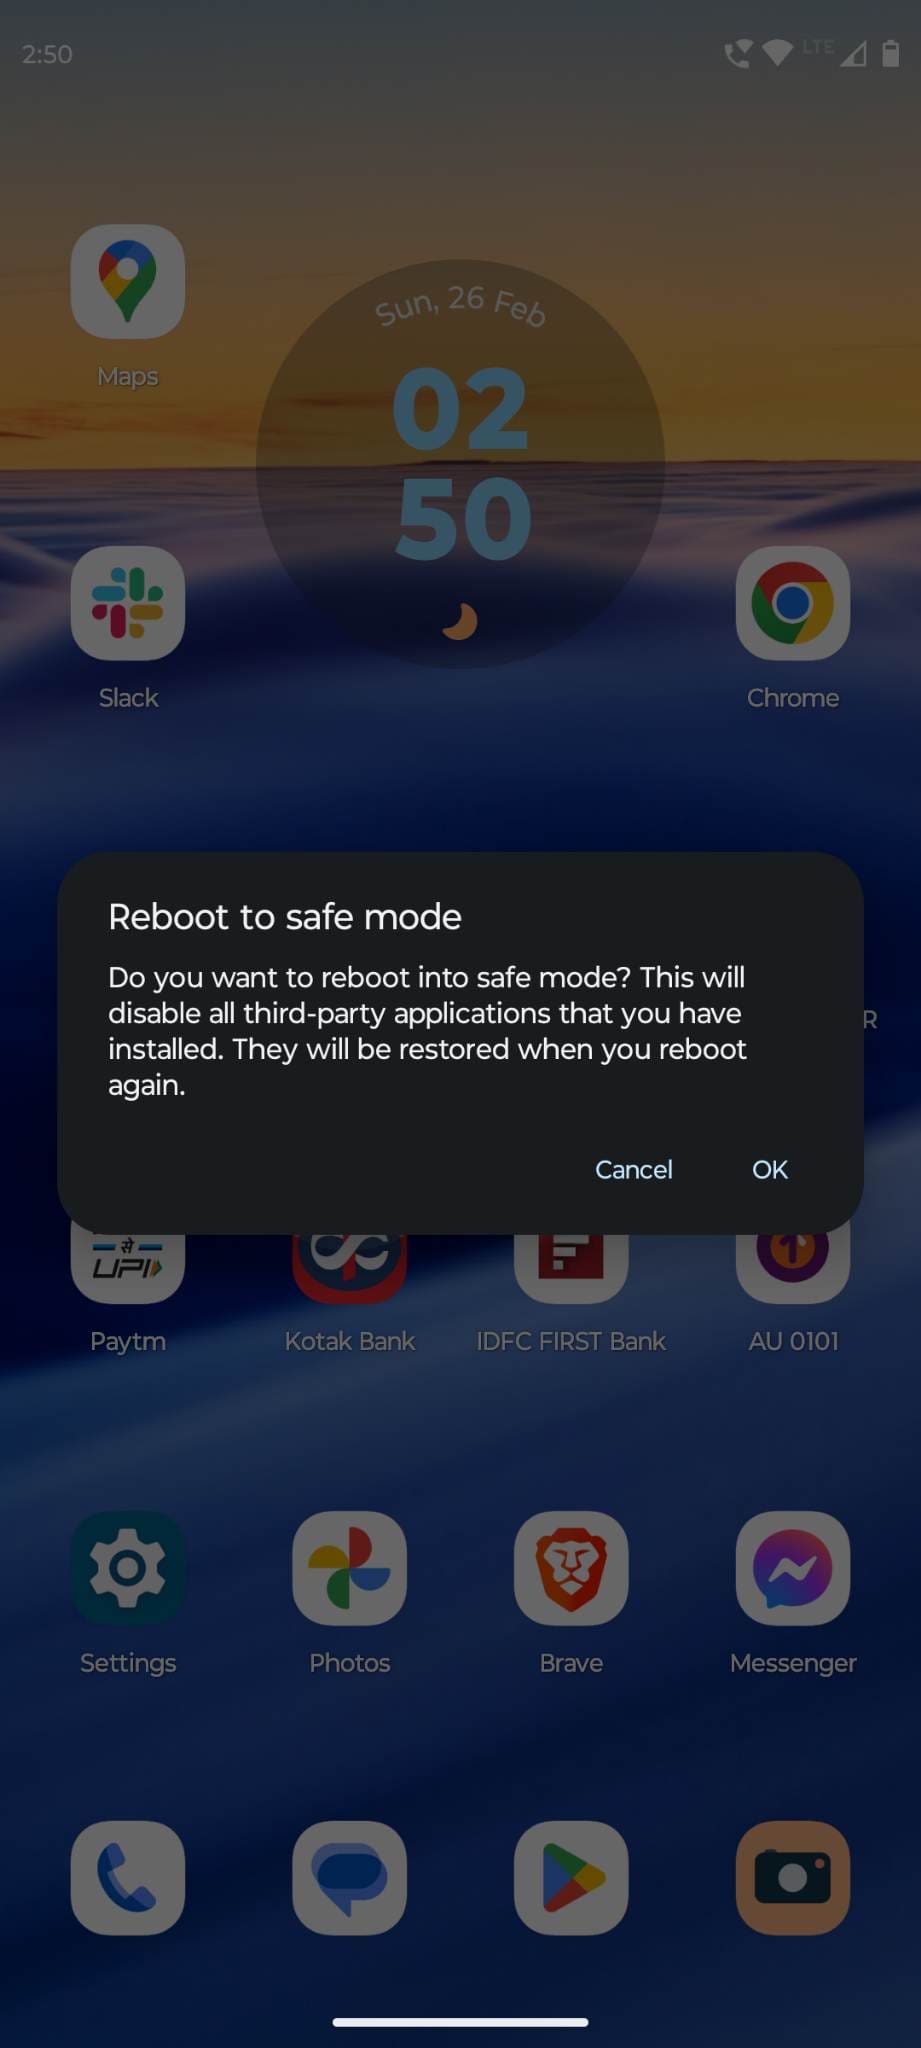 Learn how to fix Android apps not working bug by rebooting device into Safe Mode